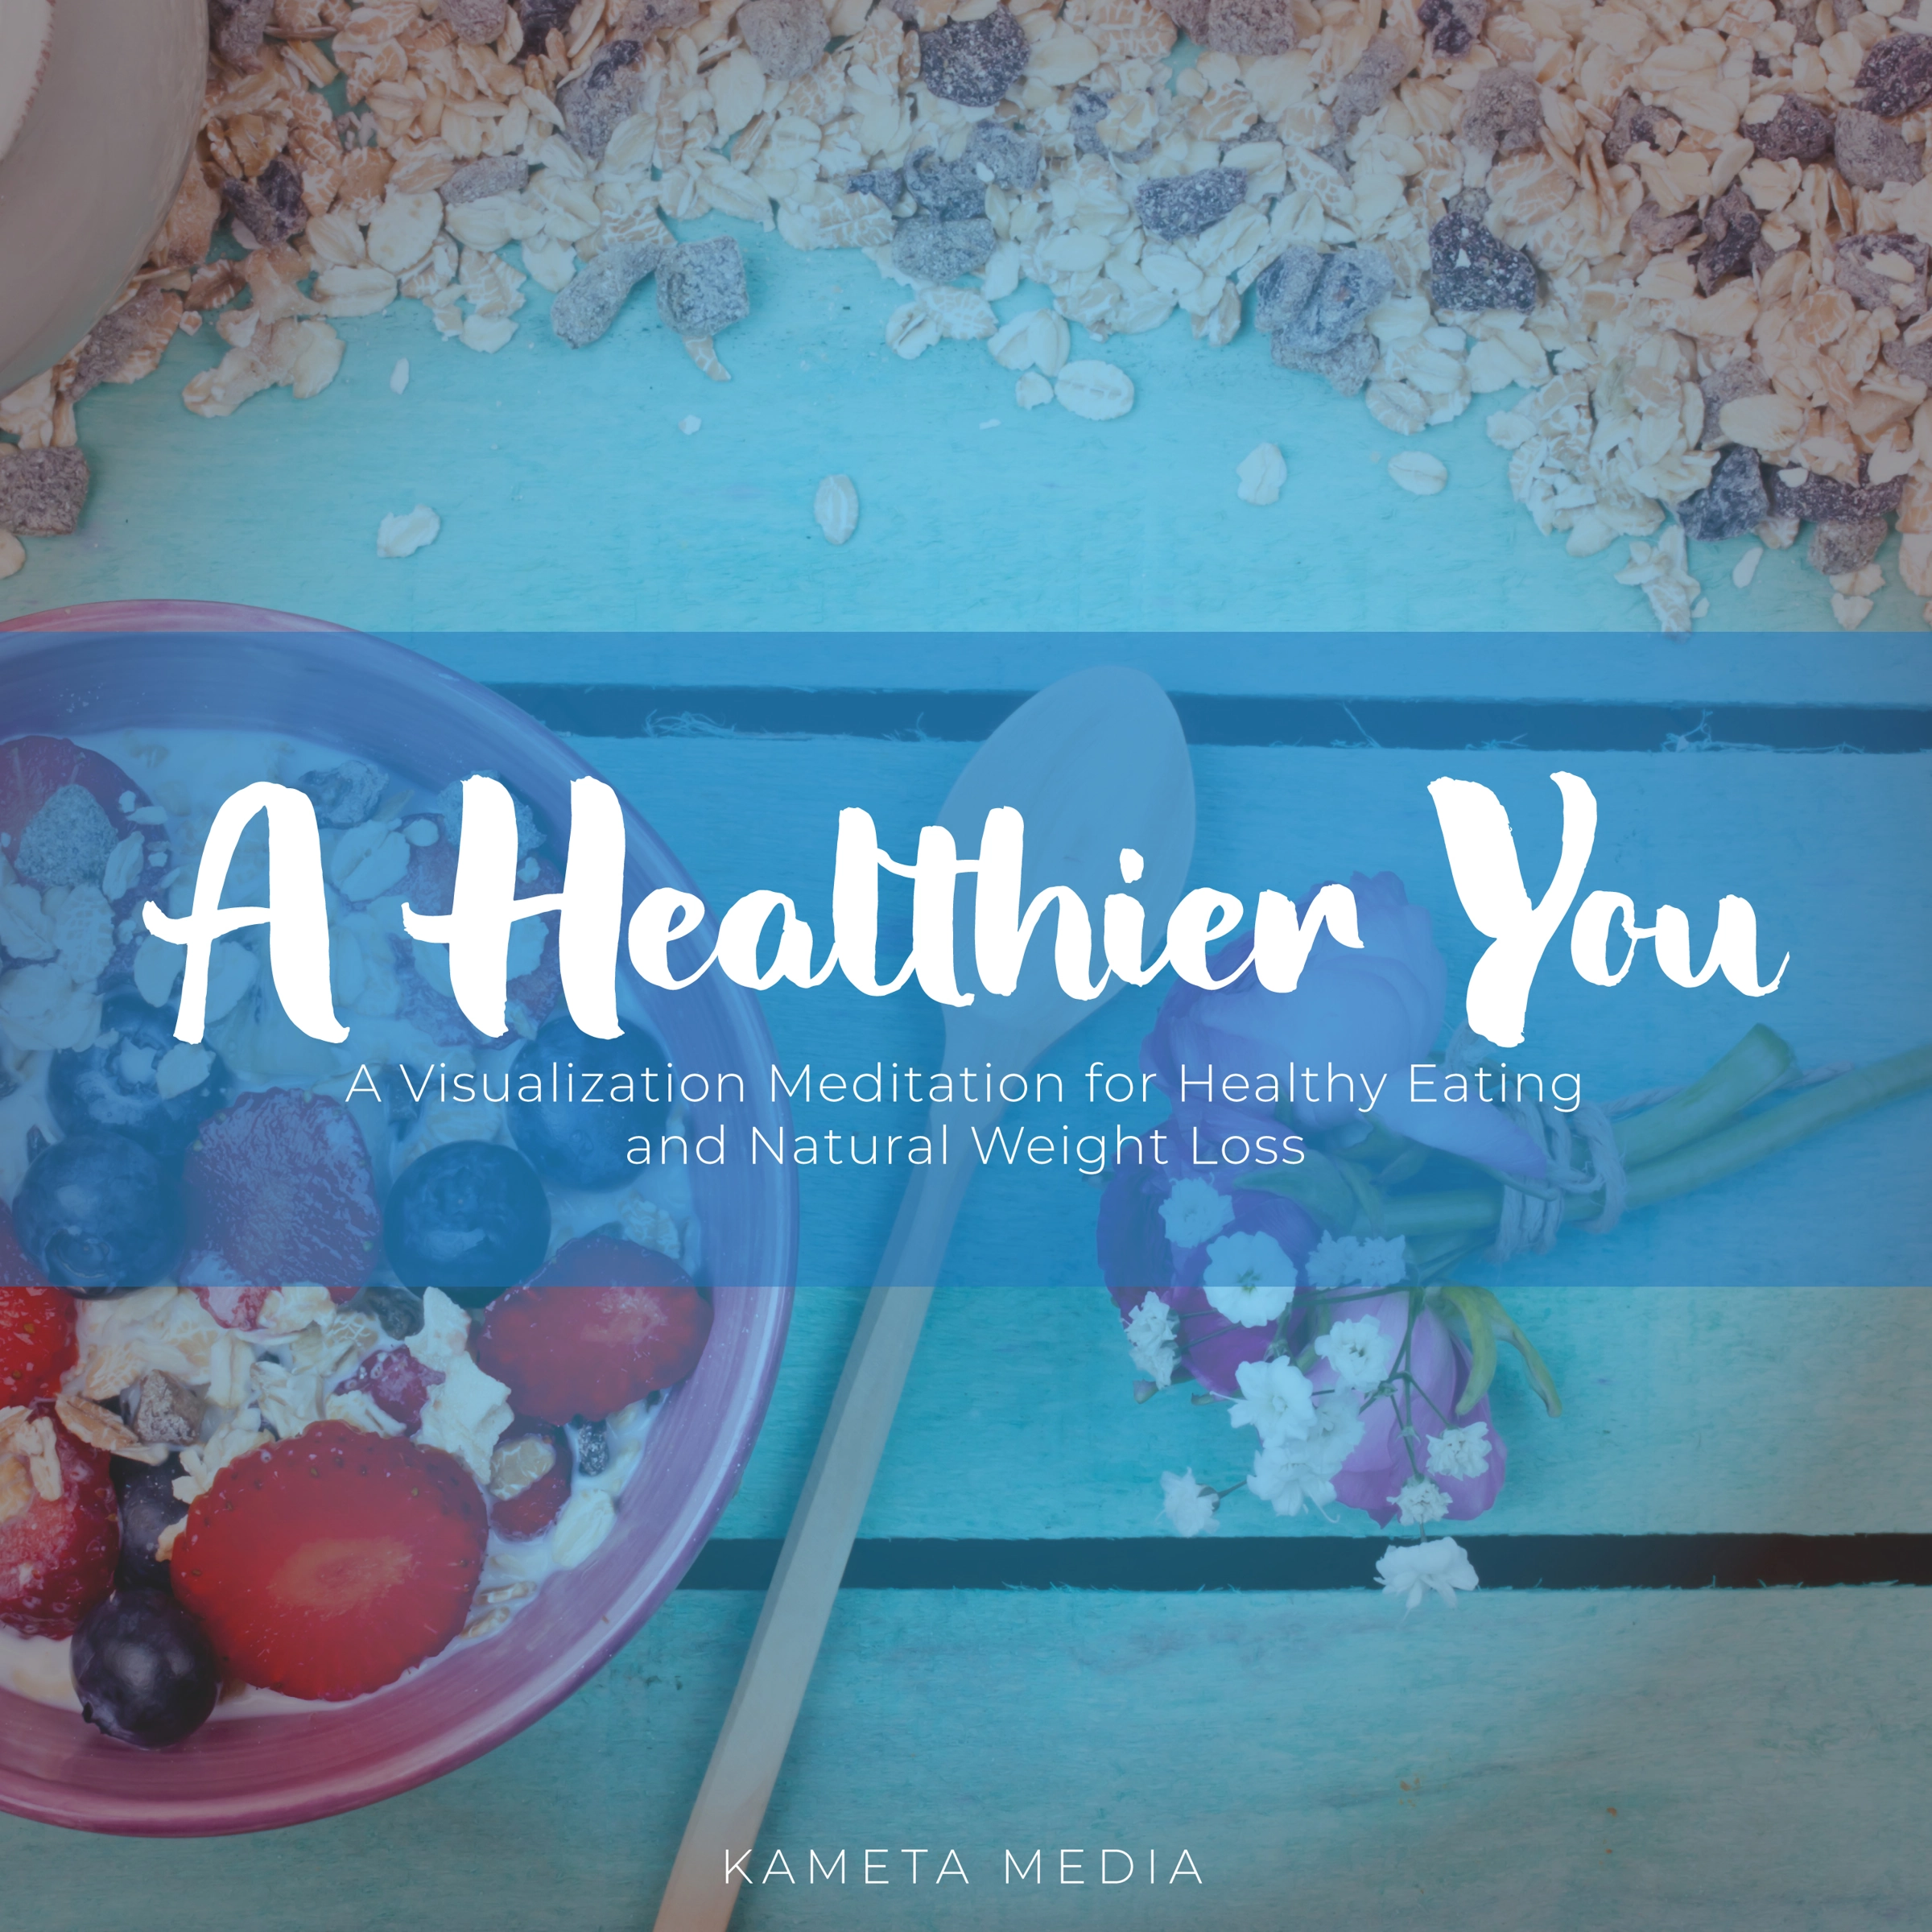 A Healthier You: A Visualization Meditation for Healthy Eating and Natural Weight Loss Audiobook by Kameta Media